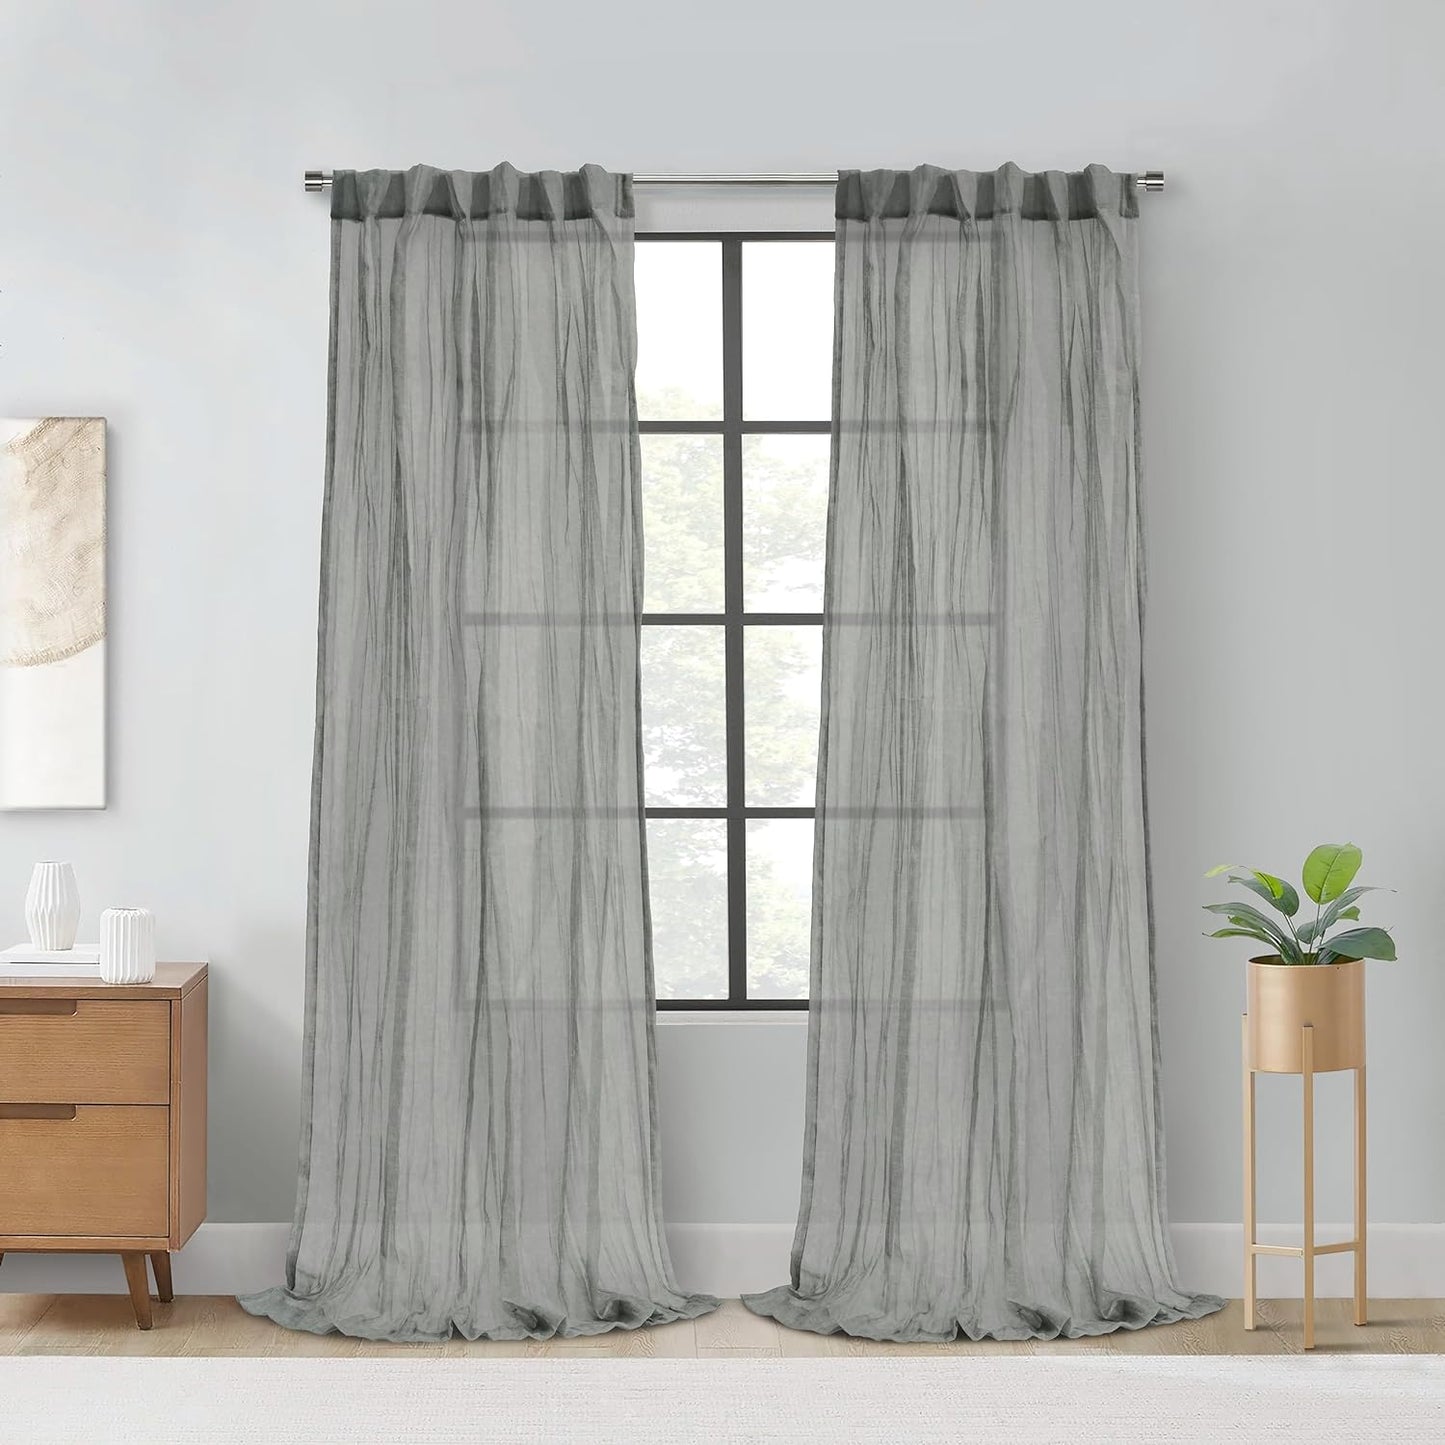 Richmark International Paloma Sheer Dual Header Curtain Panel 52 X 95 in Apricot  Commonwealth Home Fashions Grey 52" X 108" 